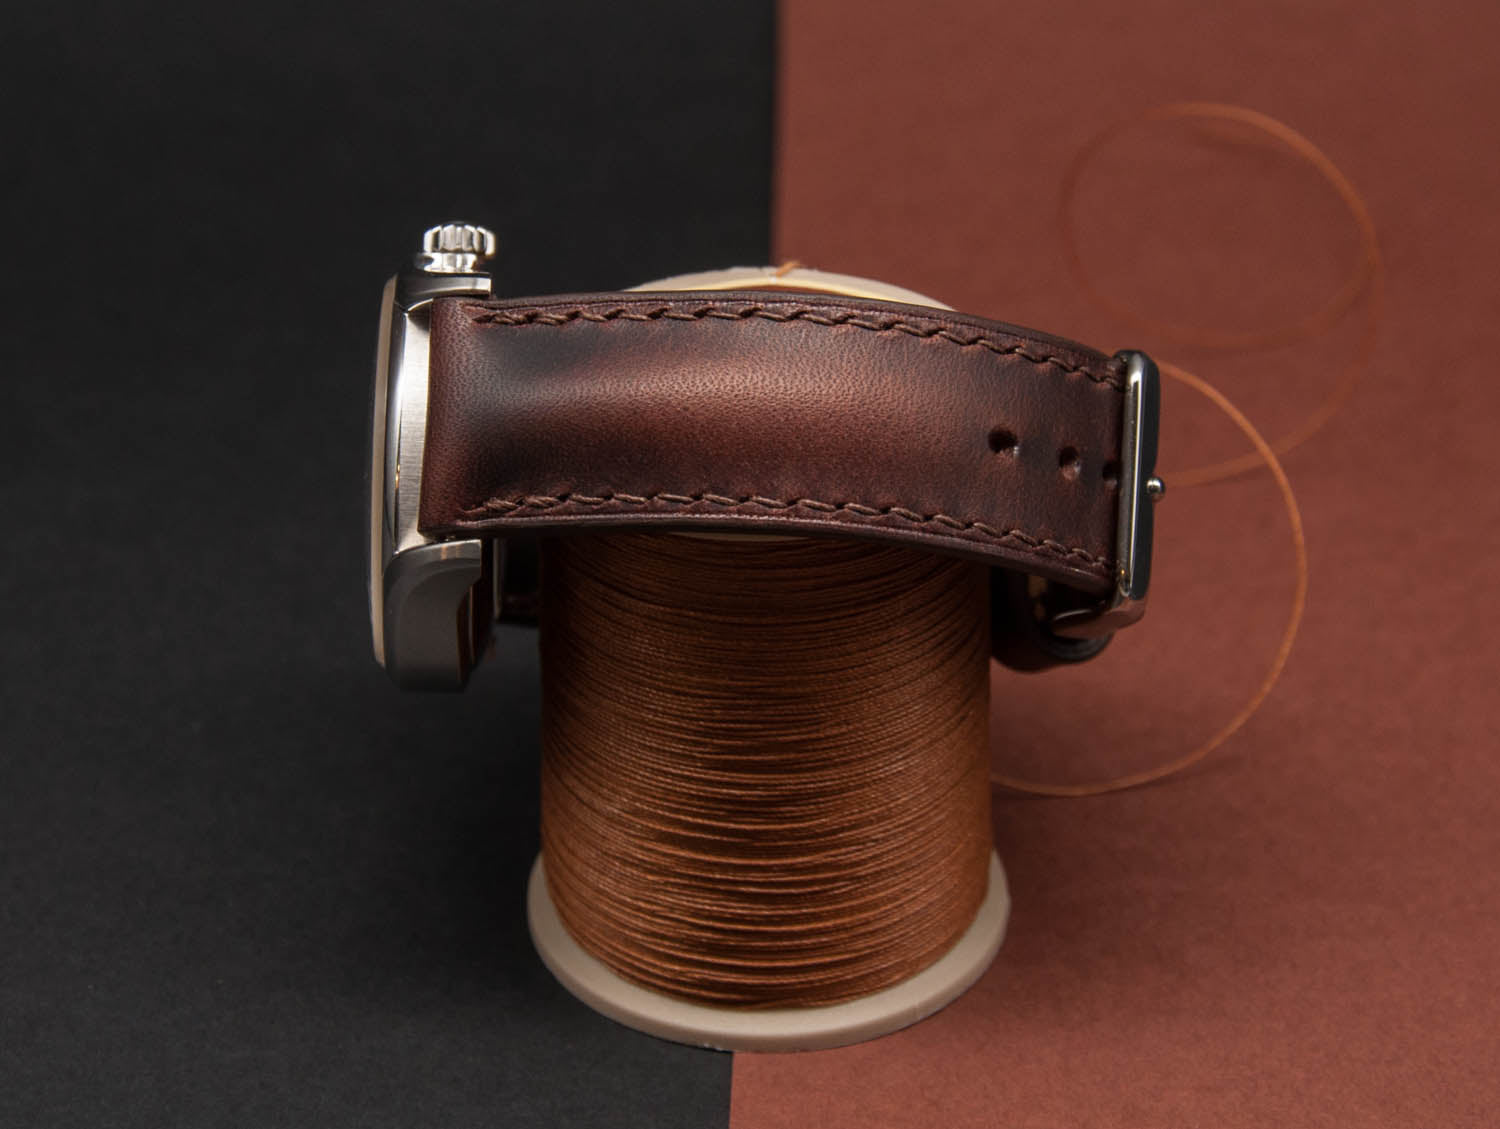 Padded Leather Watch Strap BADALASSI TABACCO